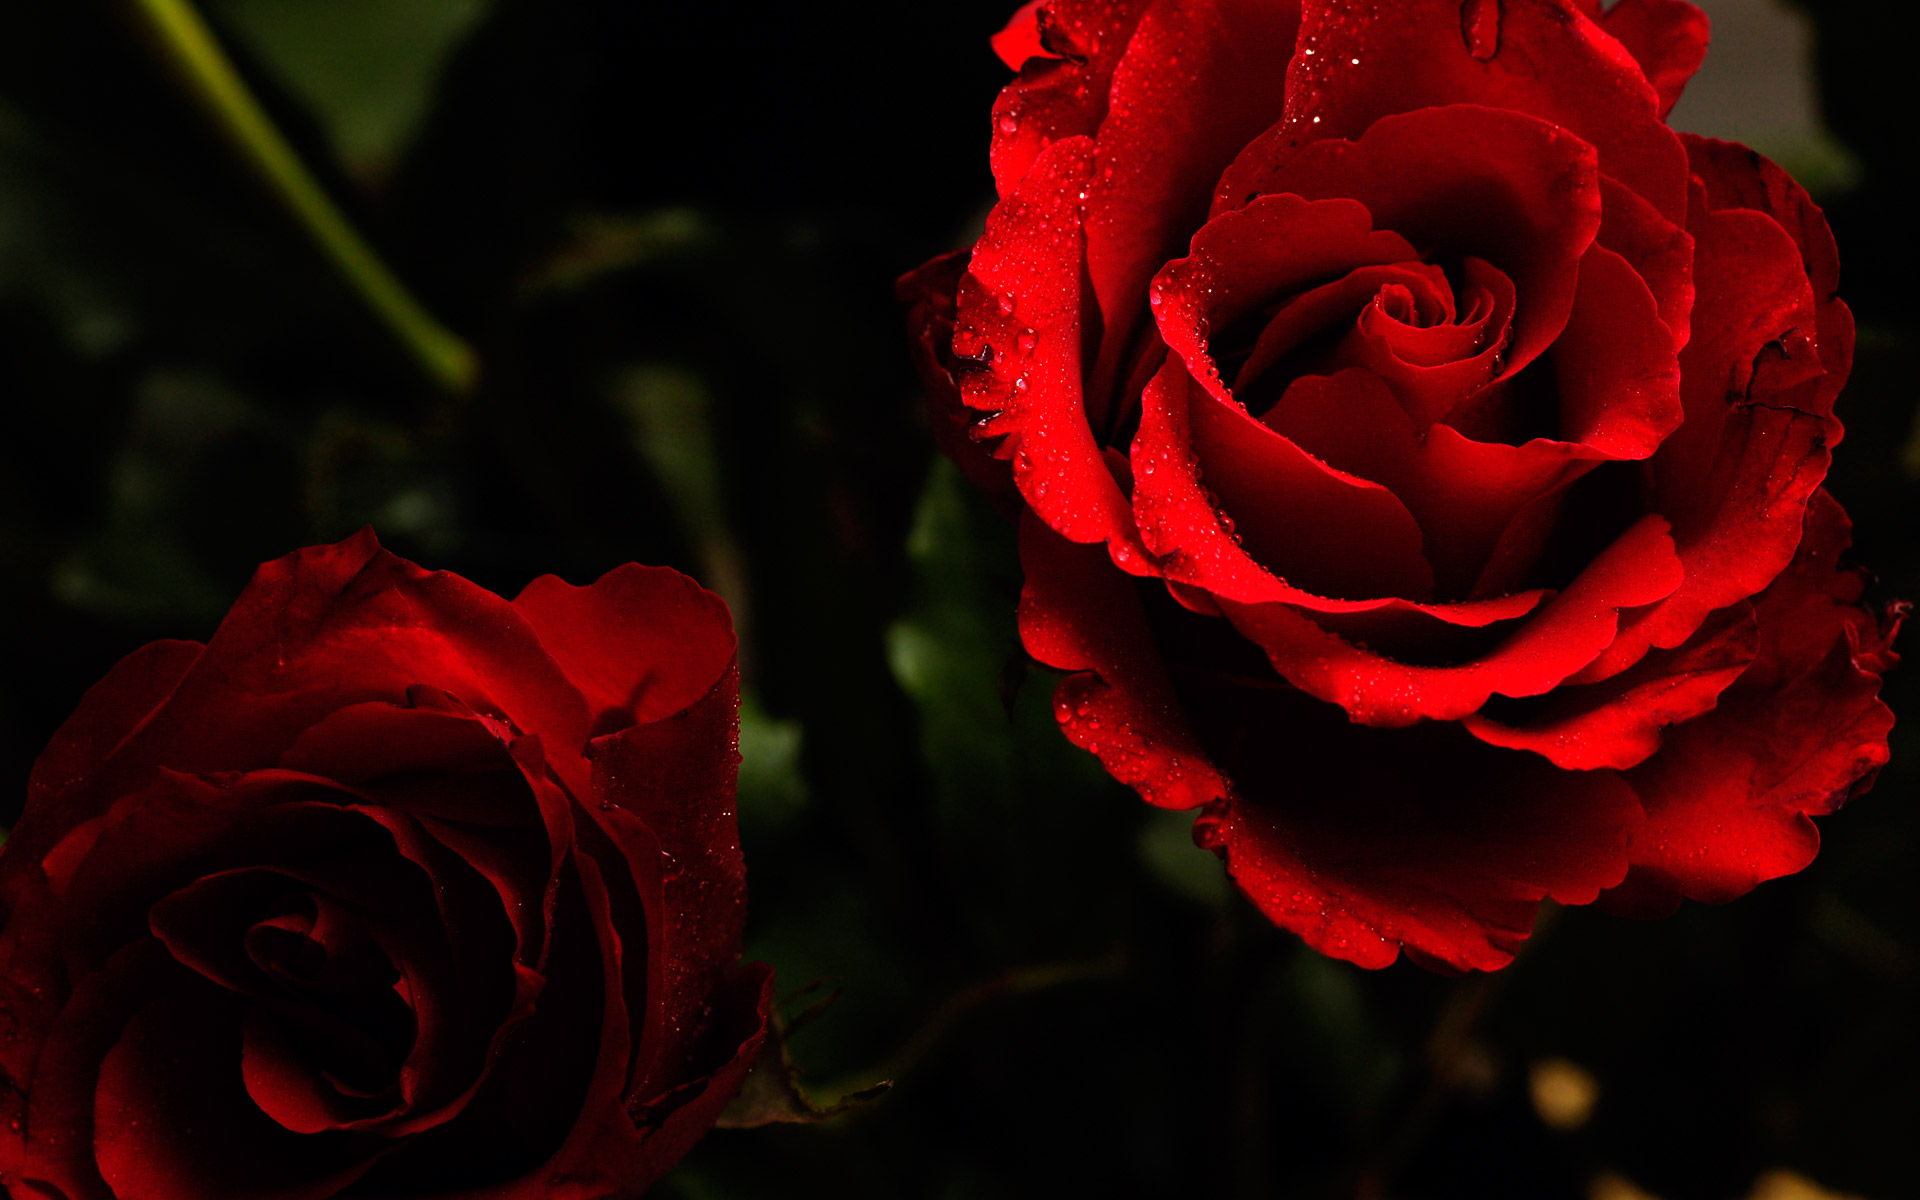 Wet Roses wallpapers | Wet Roses stock photos